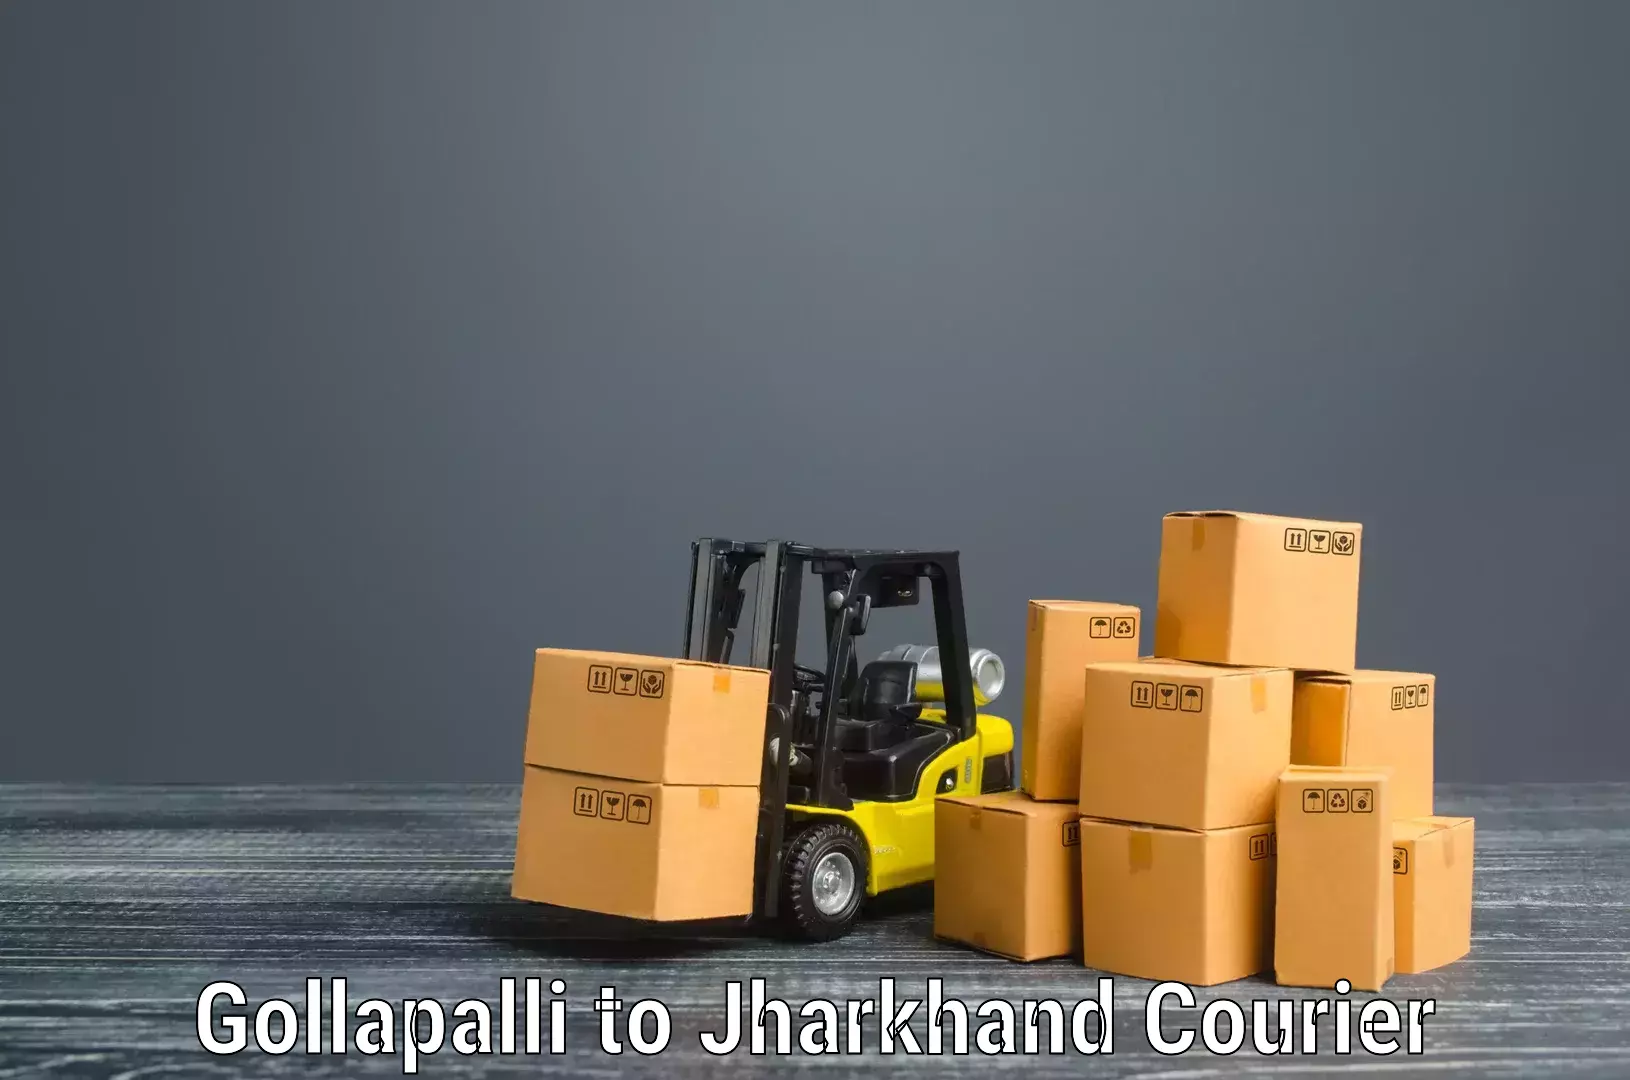 Furniture delivery service Gollapalli to Jharkhand